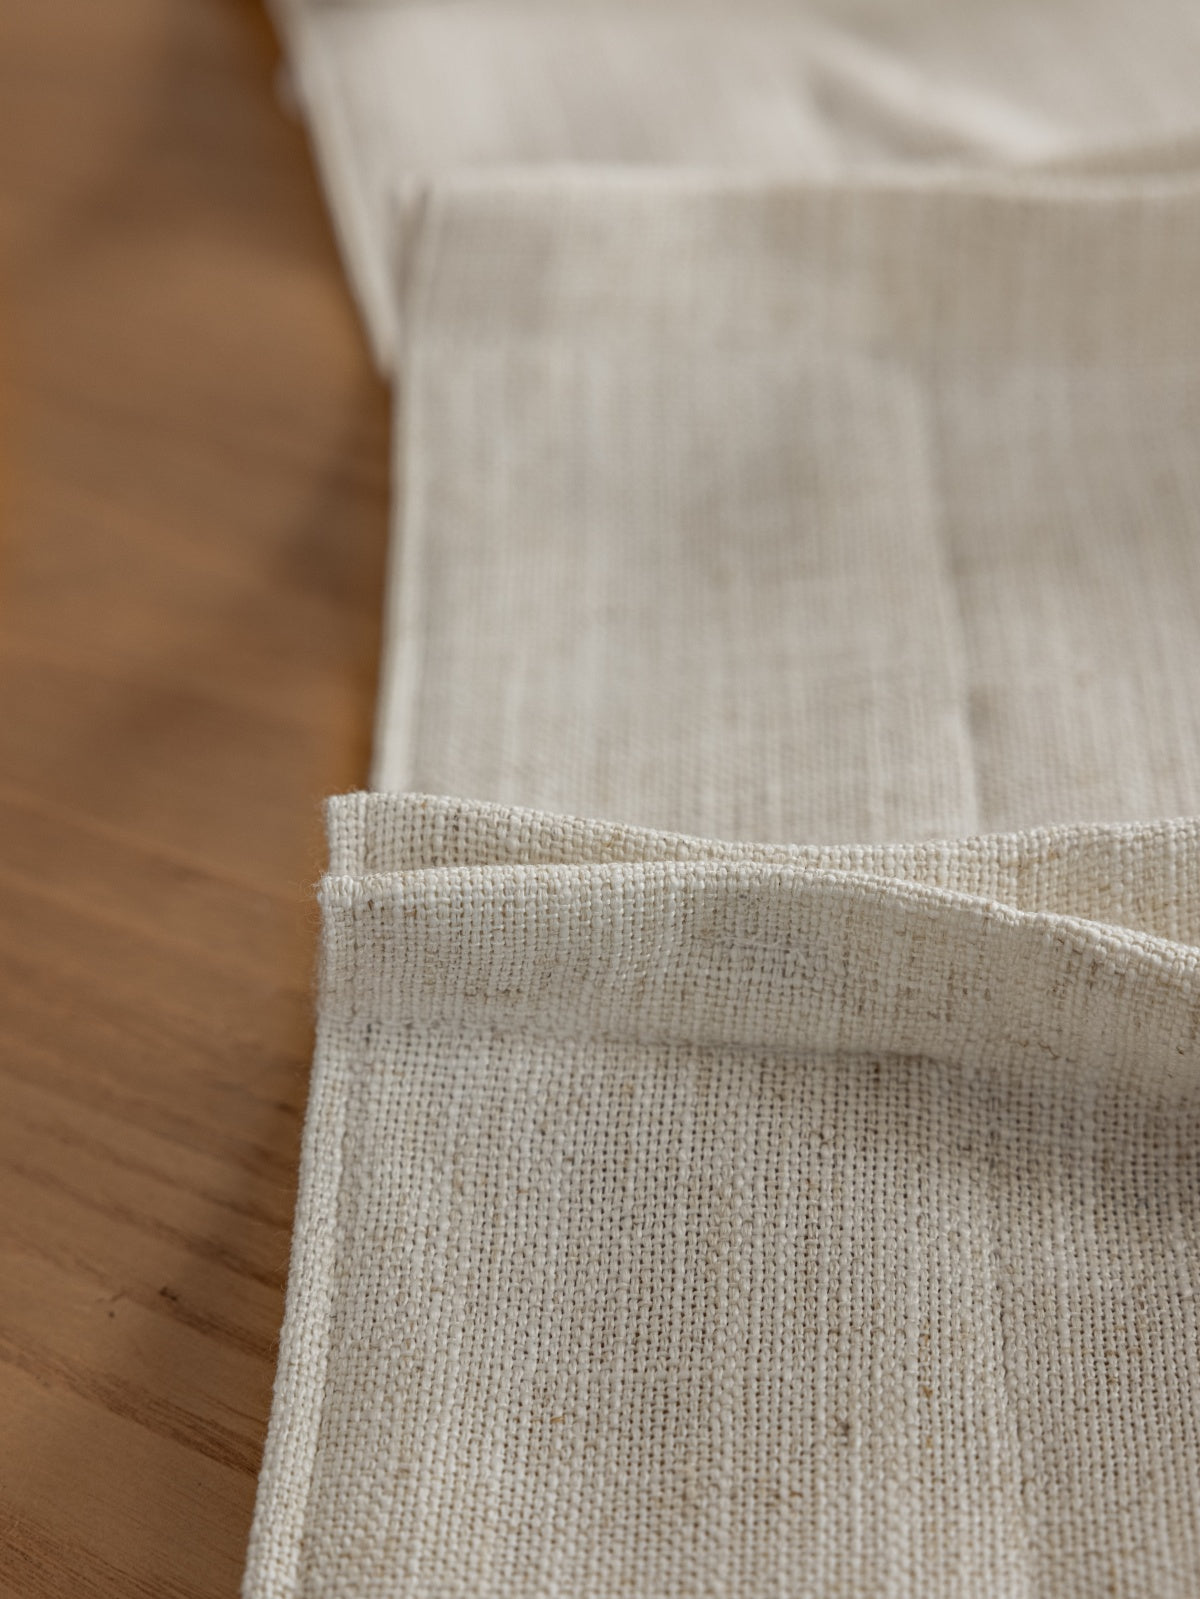 Close-up of white French linen blend drape with fine texture and precise hemming on a wooden surface, illustrating luxury and quality